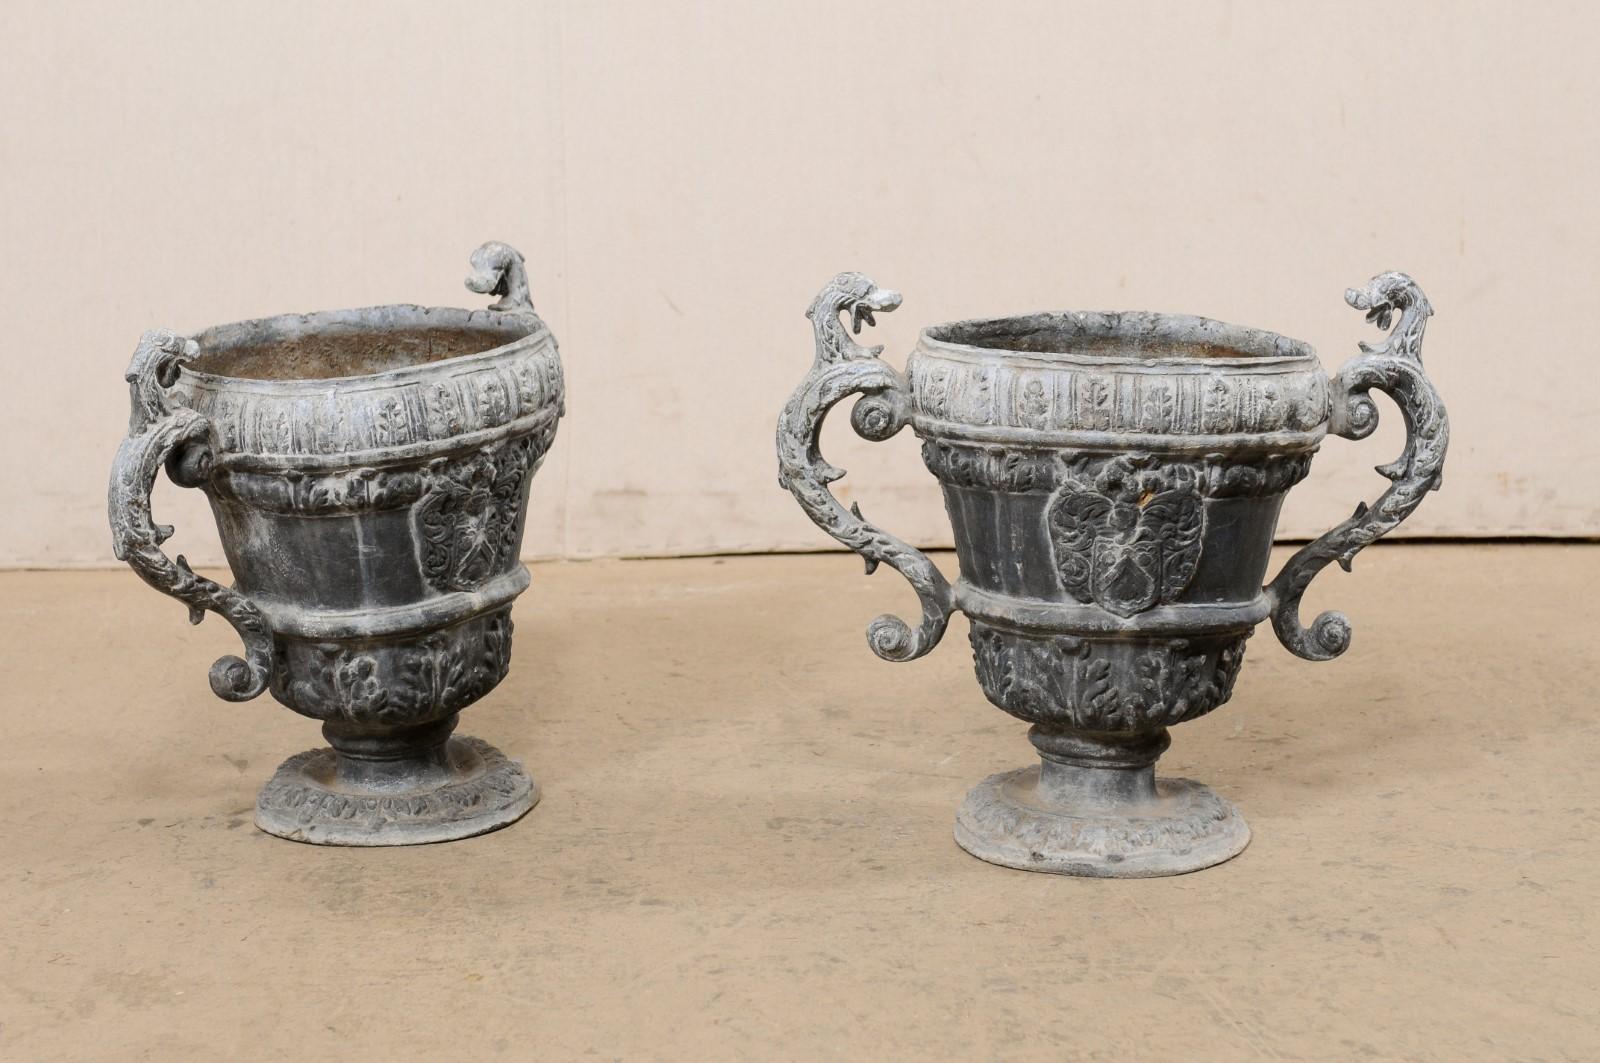 French Pair of 18th C. Decorative Lead Urn Planters for Garden Patio For Sale 7